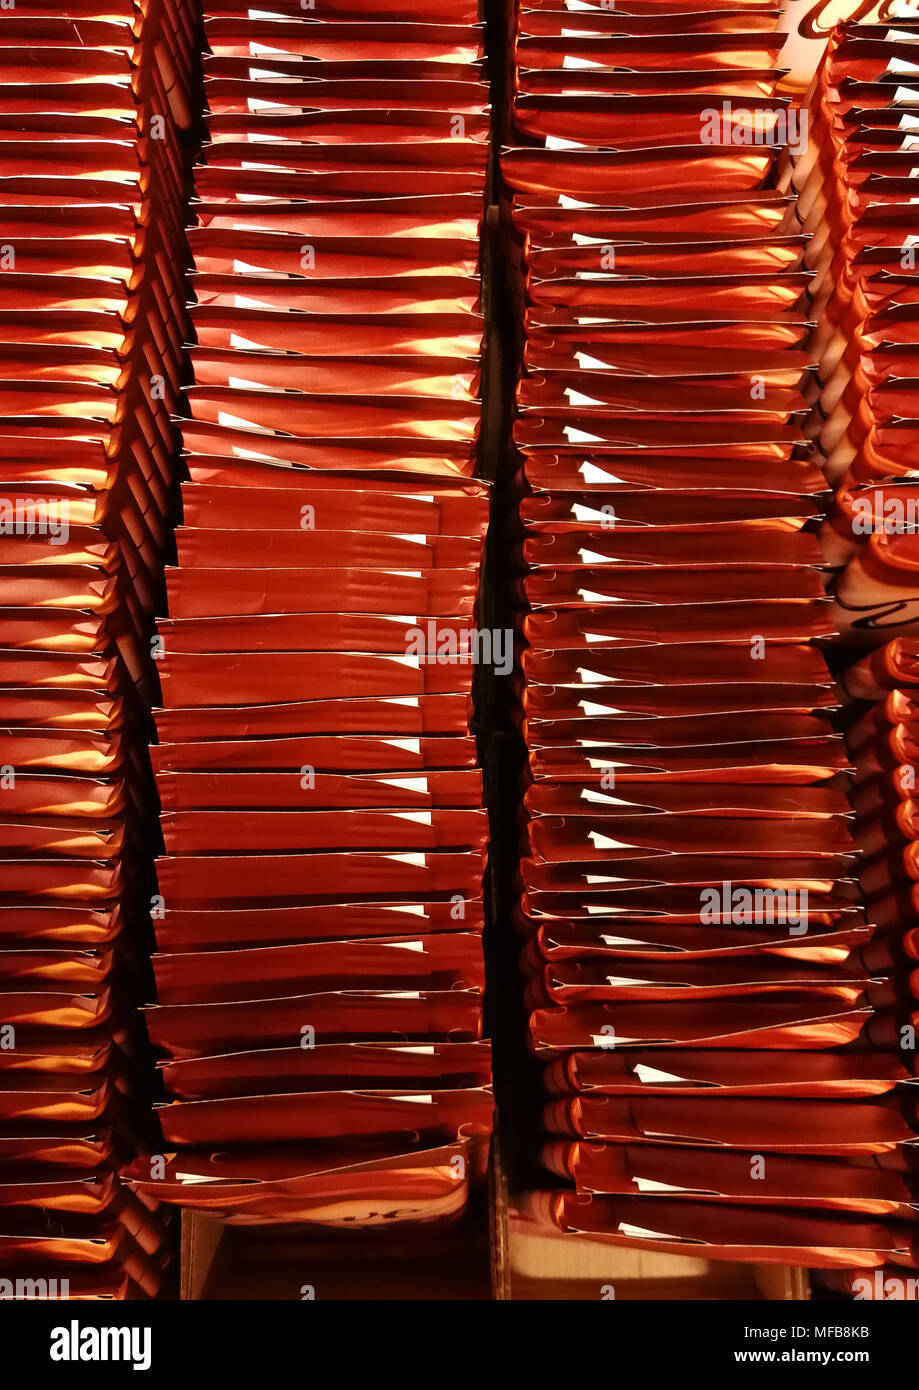 The view from the top. Many colorful rows of chocolates in one package. Stock Photo